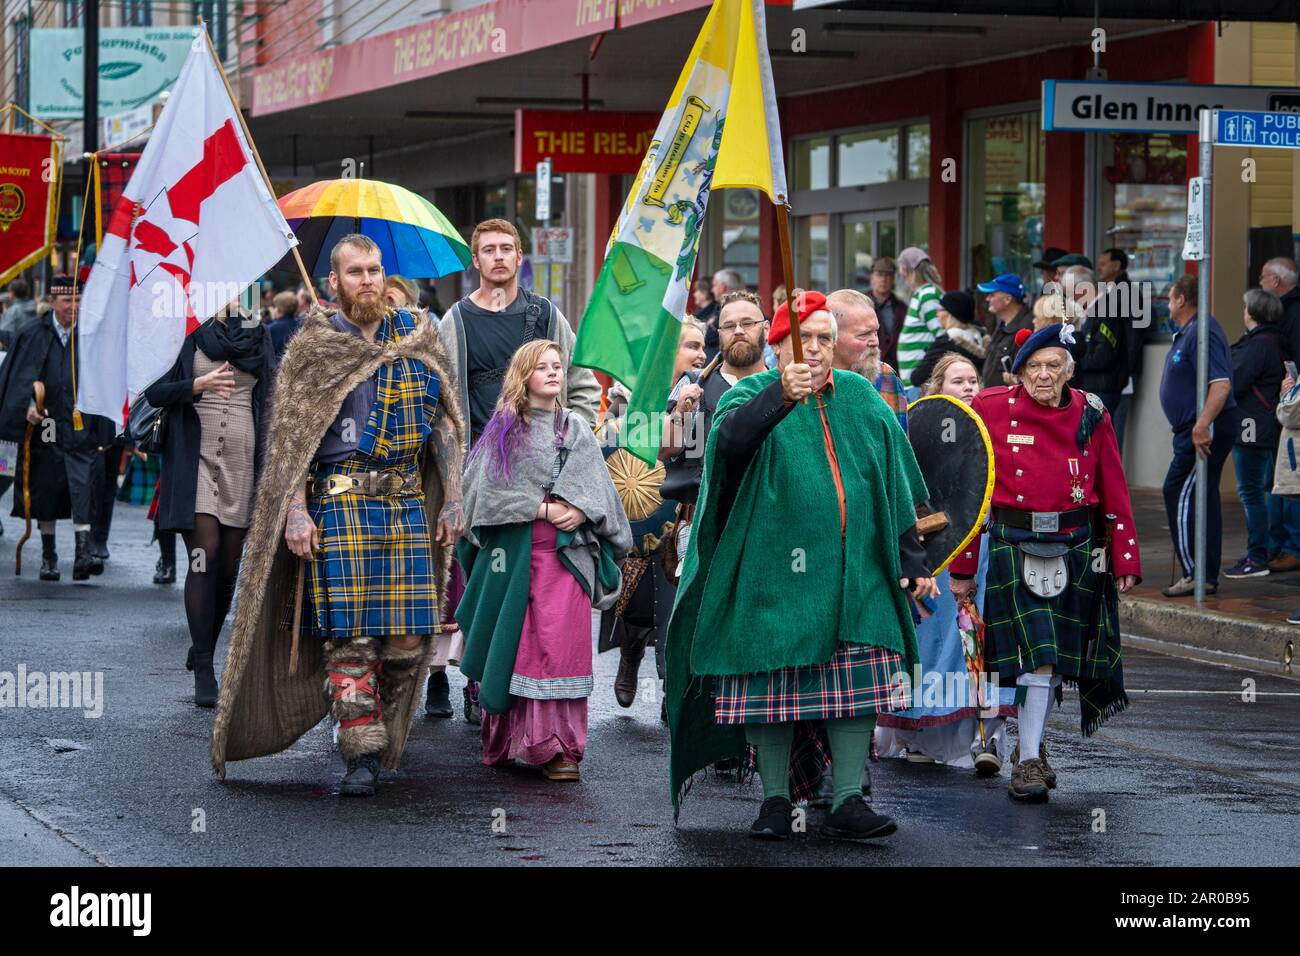 Traditional costumes during street parade for opening of the Glen Innes Celtic Festival NSW Stock Photo